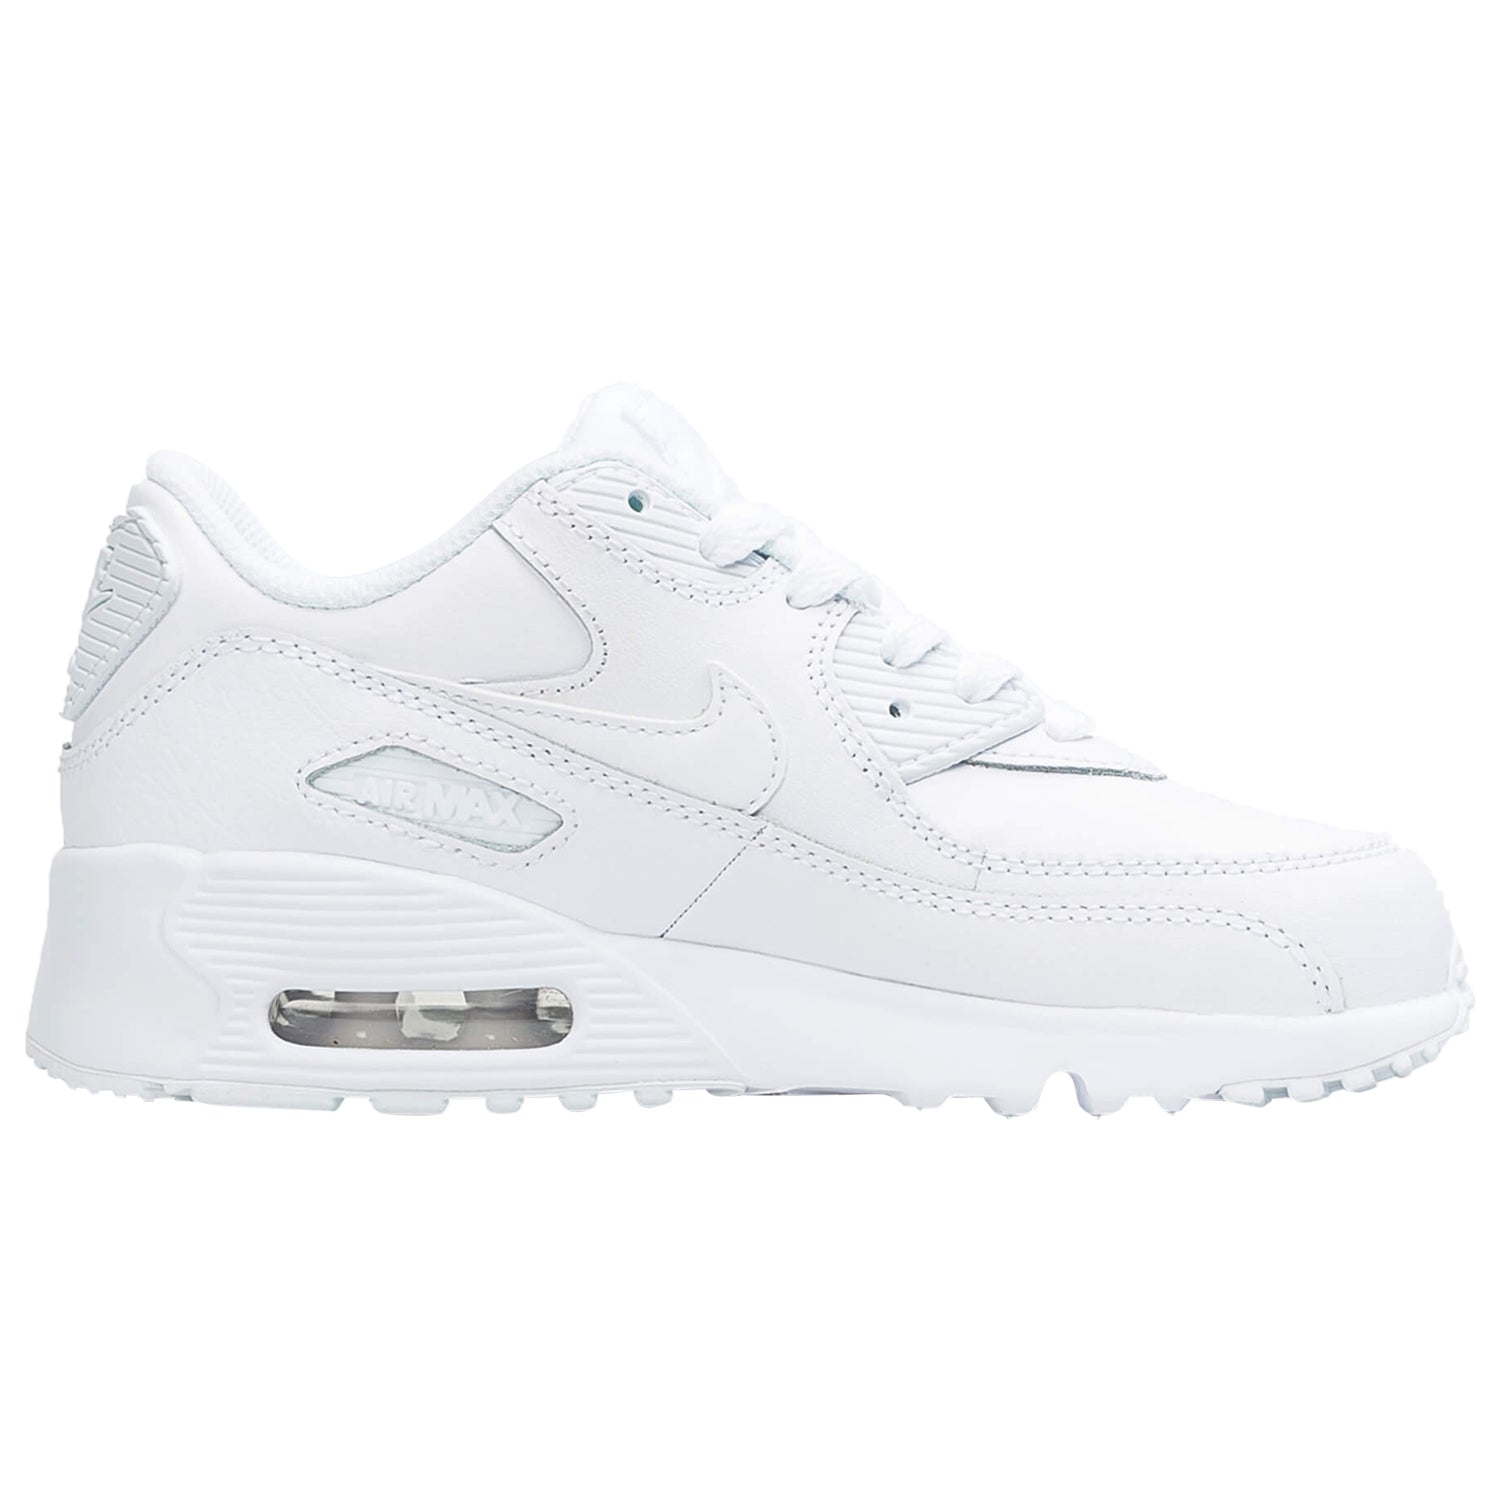 Nike Air Max 90 LTR (PS) Shoes White/White  Boys / Girls Style :833414